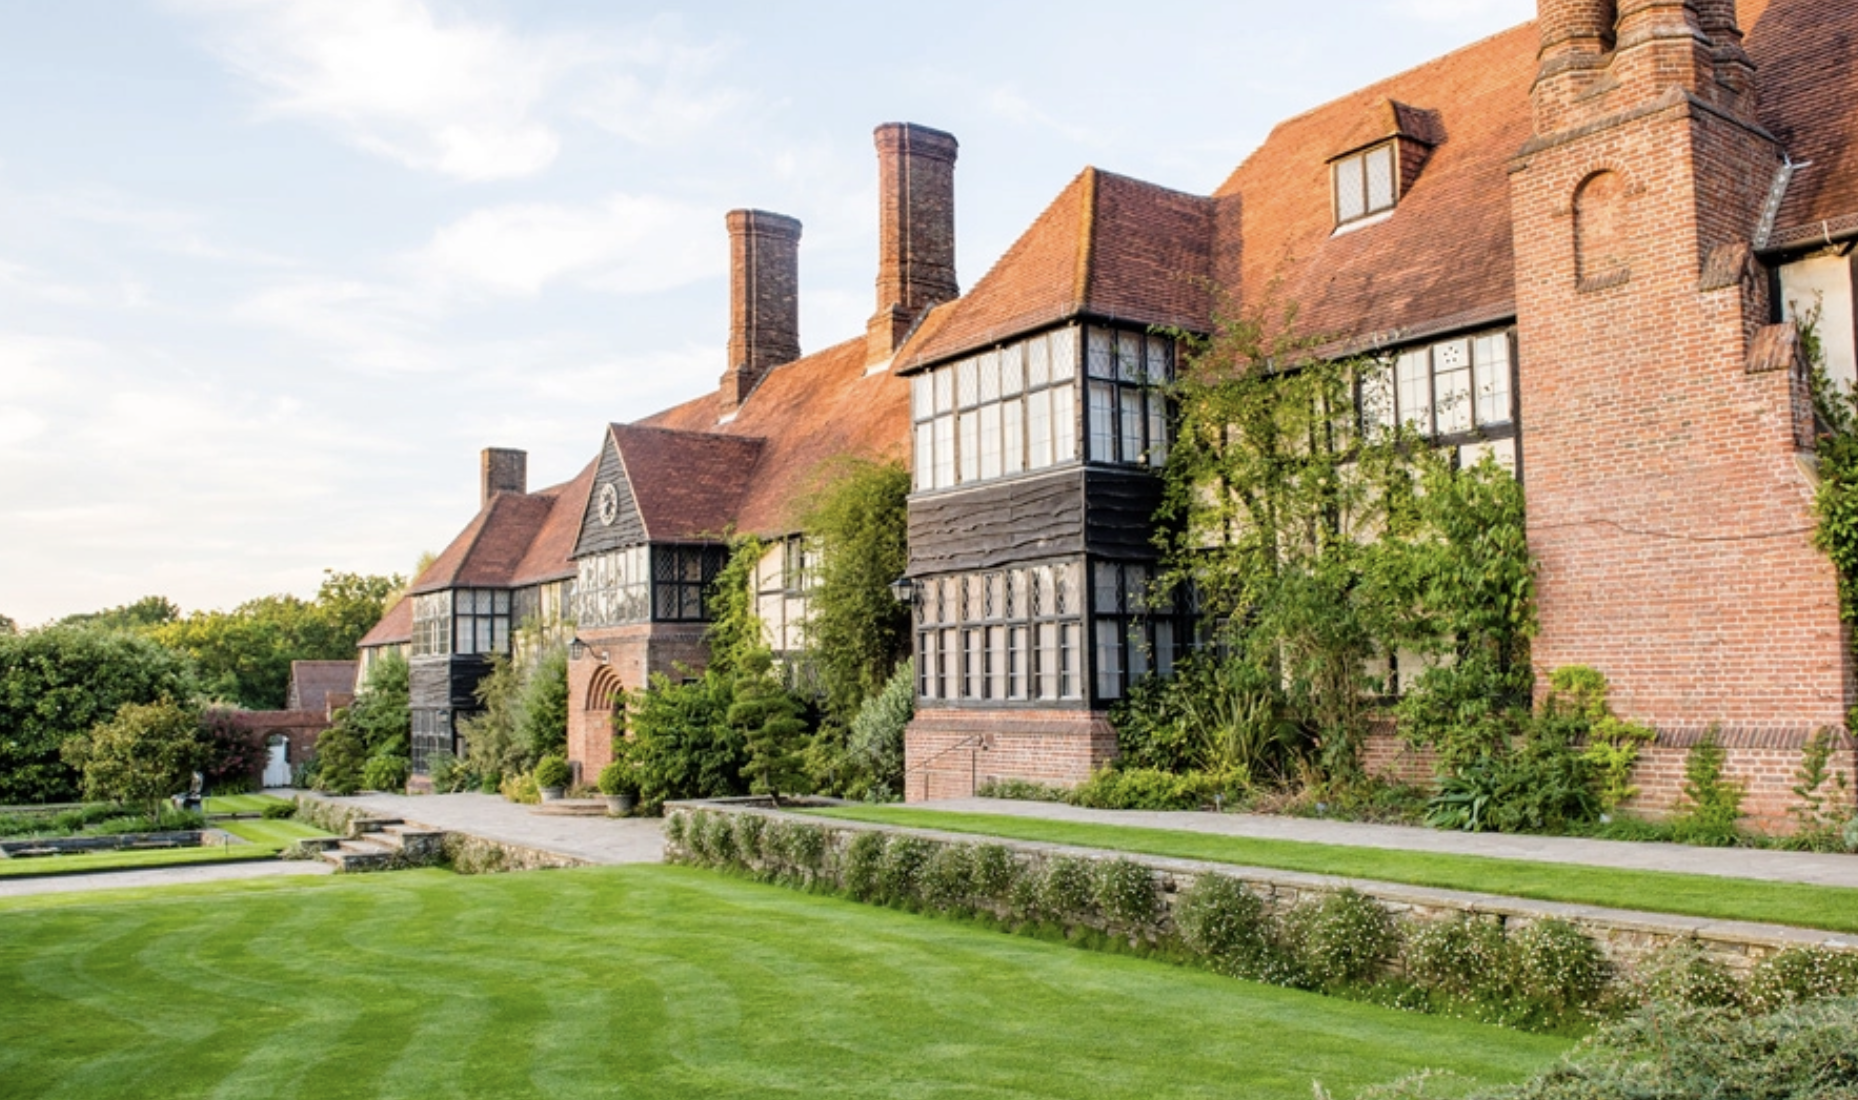 The Old Laboratory building at Wisley opens in March